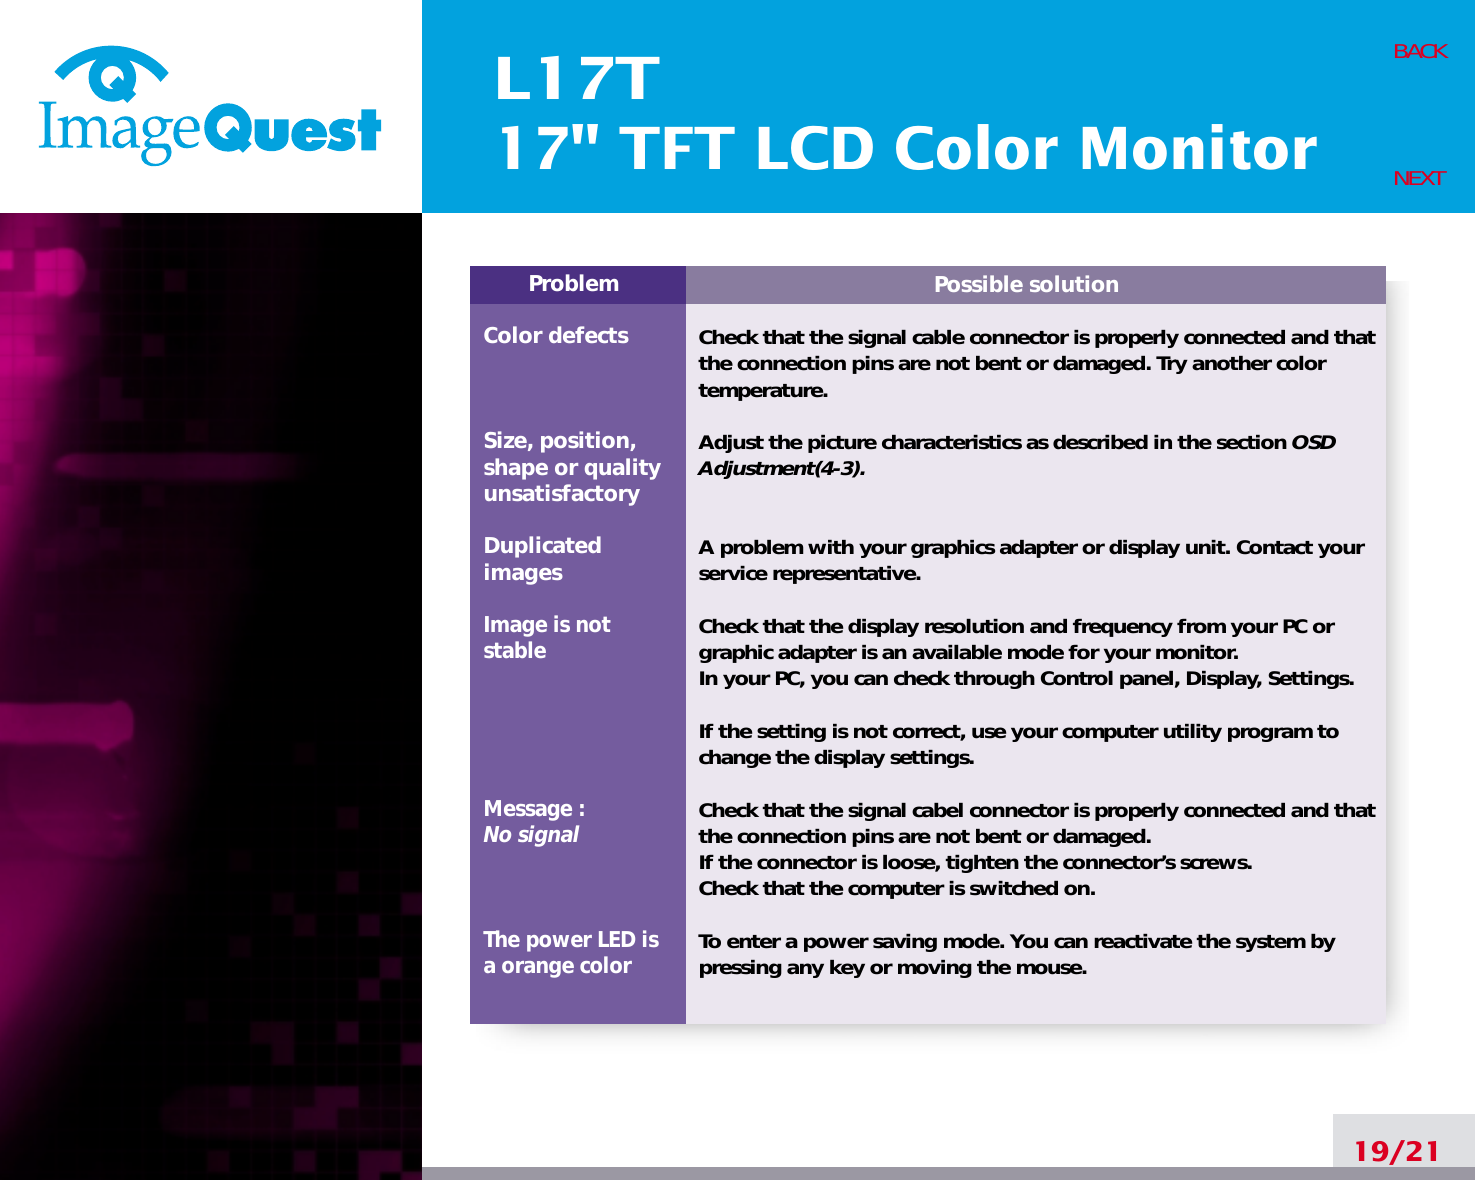 L17T17&quot; TFT LCD Color Monitor19/21BACKNEXTPossible solutionCheck that the signal cable connector is properly connected and thatthe connection pins are not bent or damaged. Try another colortemperature. Adjust the picture characteristics as described in the section OSDAdjustment(4-3).A problem with your graphics adapter or display unit. Contact yourservice representative.Check that the display resolution and frequency from your PC orgraphic adapter is an available mode for your monitor.In your PC, you can check through Control panel, Display, Settings.If the setting is not correct, use your computer utility program tochange the display settings.Check that the signal cabel connector is properly connected and thatthe connection pins are not bent or damaged.If the connector is loose, tighten the connector’s screws.Check that the computer is switched on.To enter a power saving mode. You can reactivate the system bypressing any key or moving the mouse.ProblemColor defectsSize, position,shape or qualityunsatisfactoryDuplicatedimagesImage is notstableMessage : No signalThe power LED isa orange color